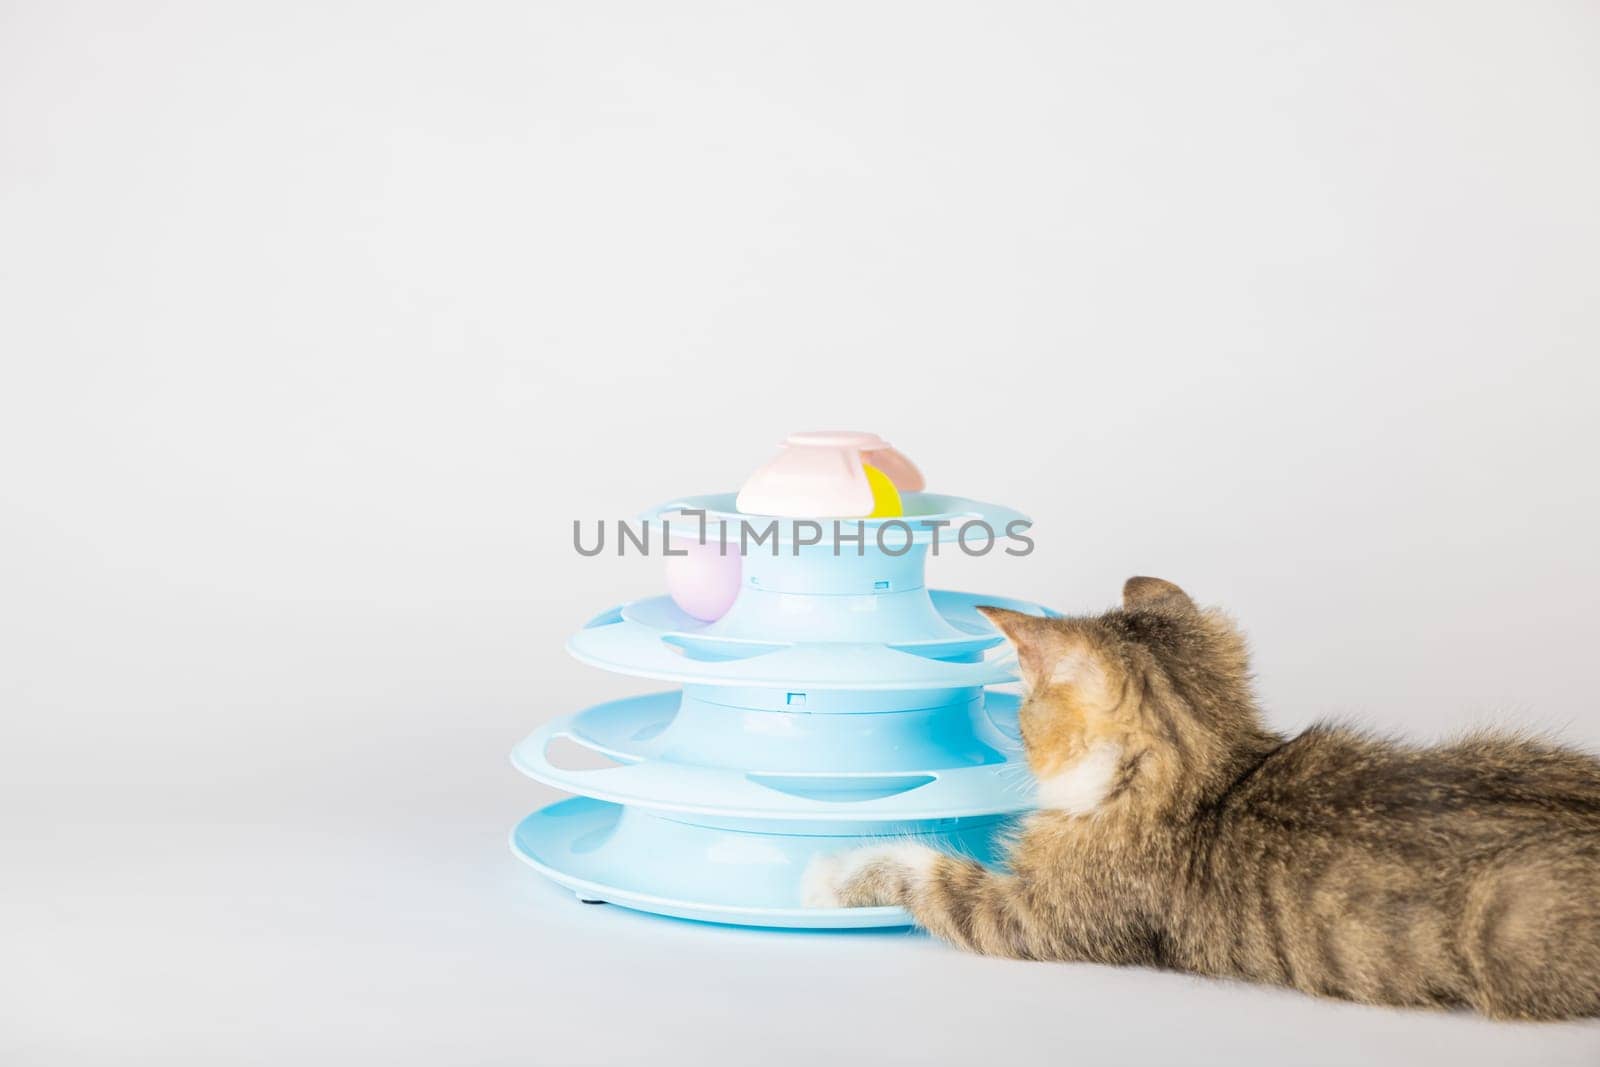 A cute kitten, with fur as orange as the sunset, is having a blast with a blue toy pyramid spiral tower. Batting at colorful balls, this funny and adorable feline is the epitome of a happy pet. by Sorapop